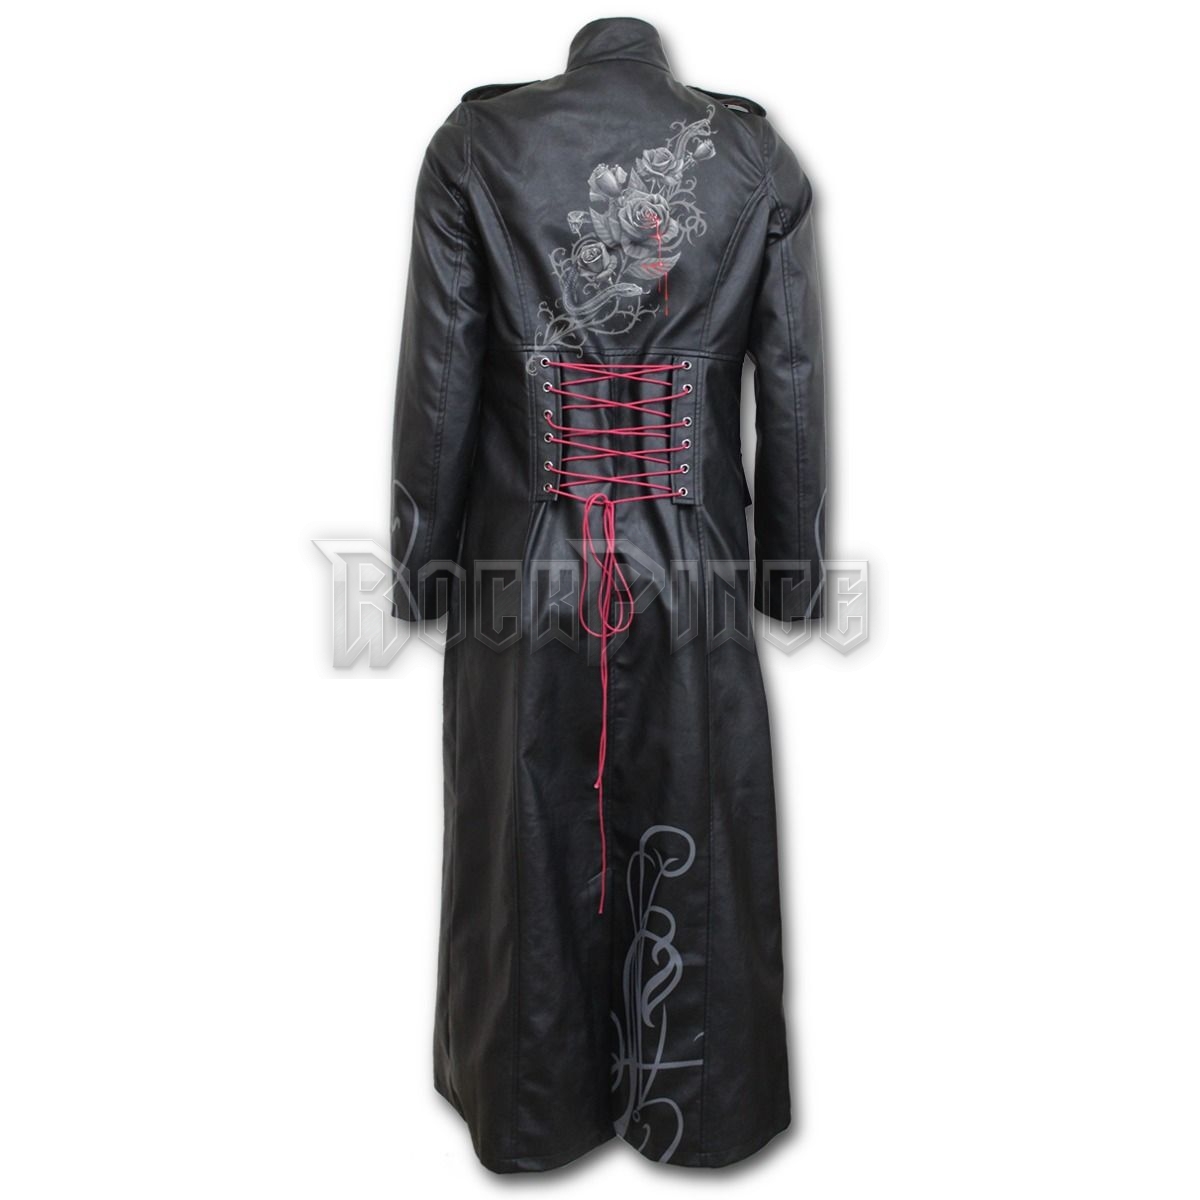 FATAL ATTRACTION - Gothic Trench Coat PU-Leather Corset Back (Plain) - D061G406